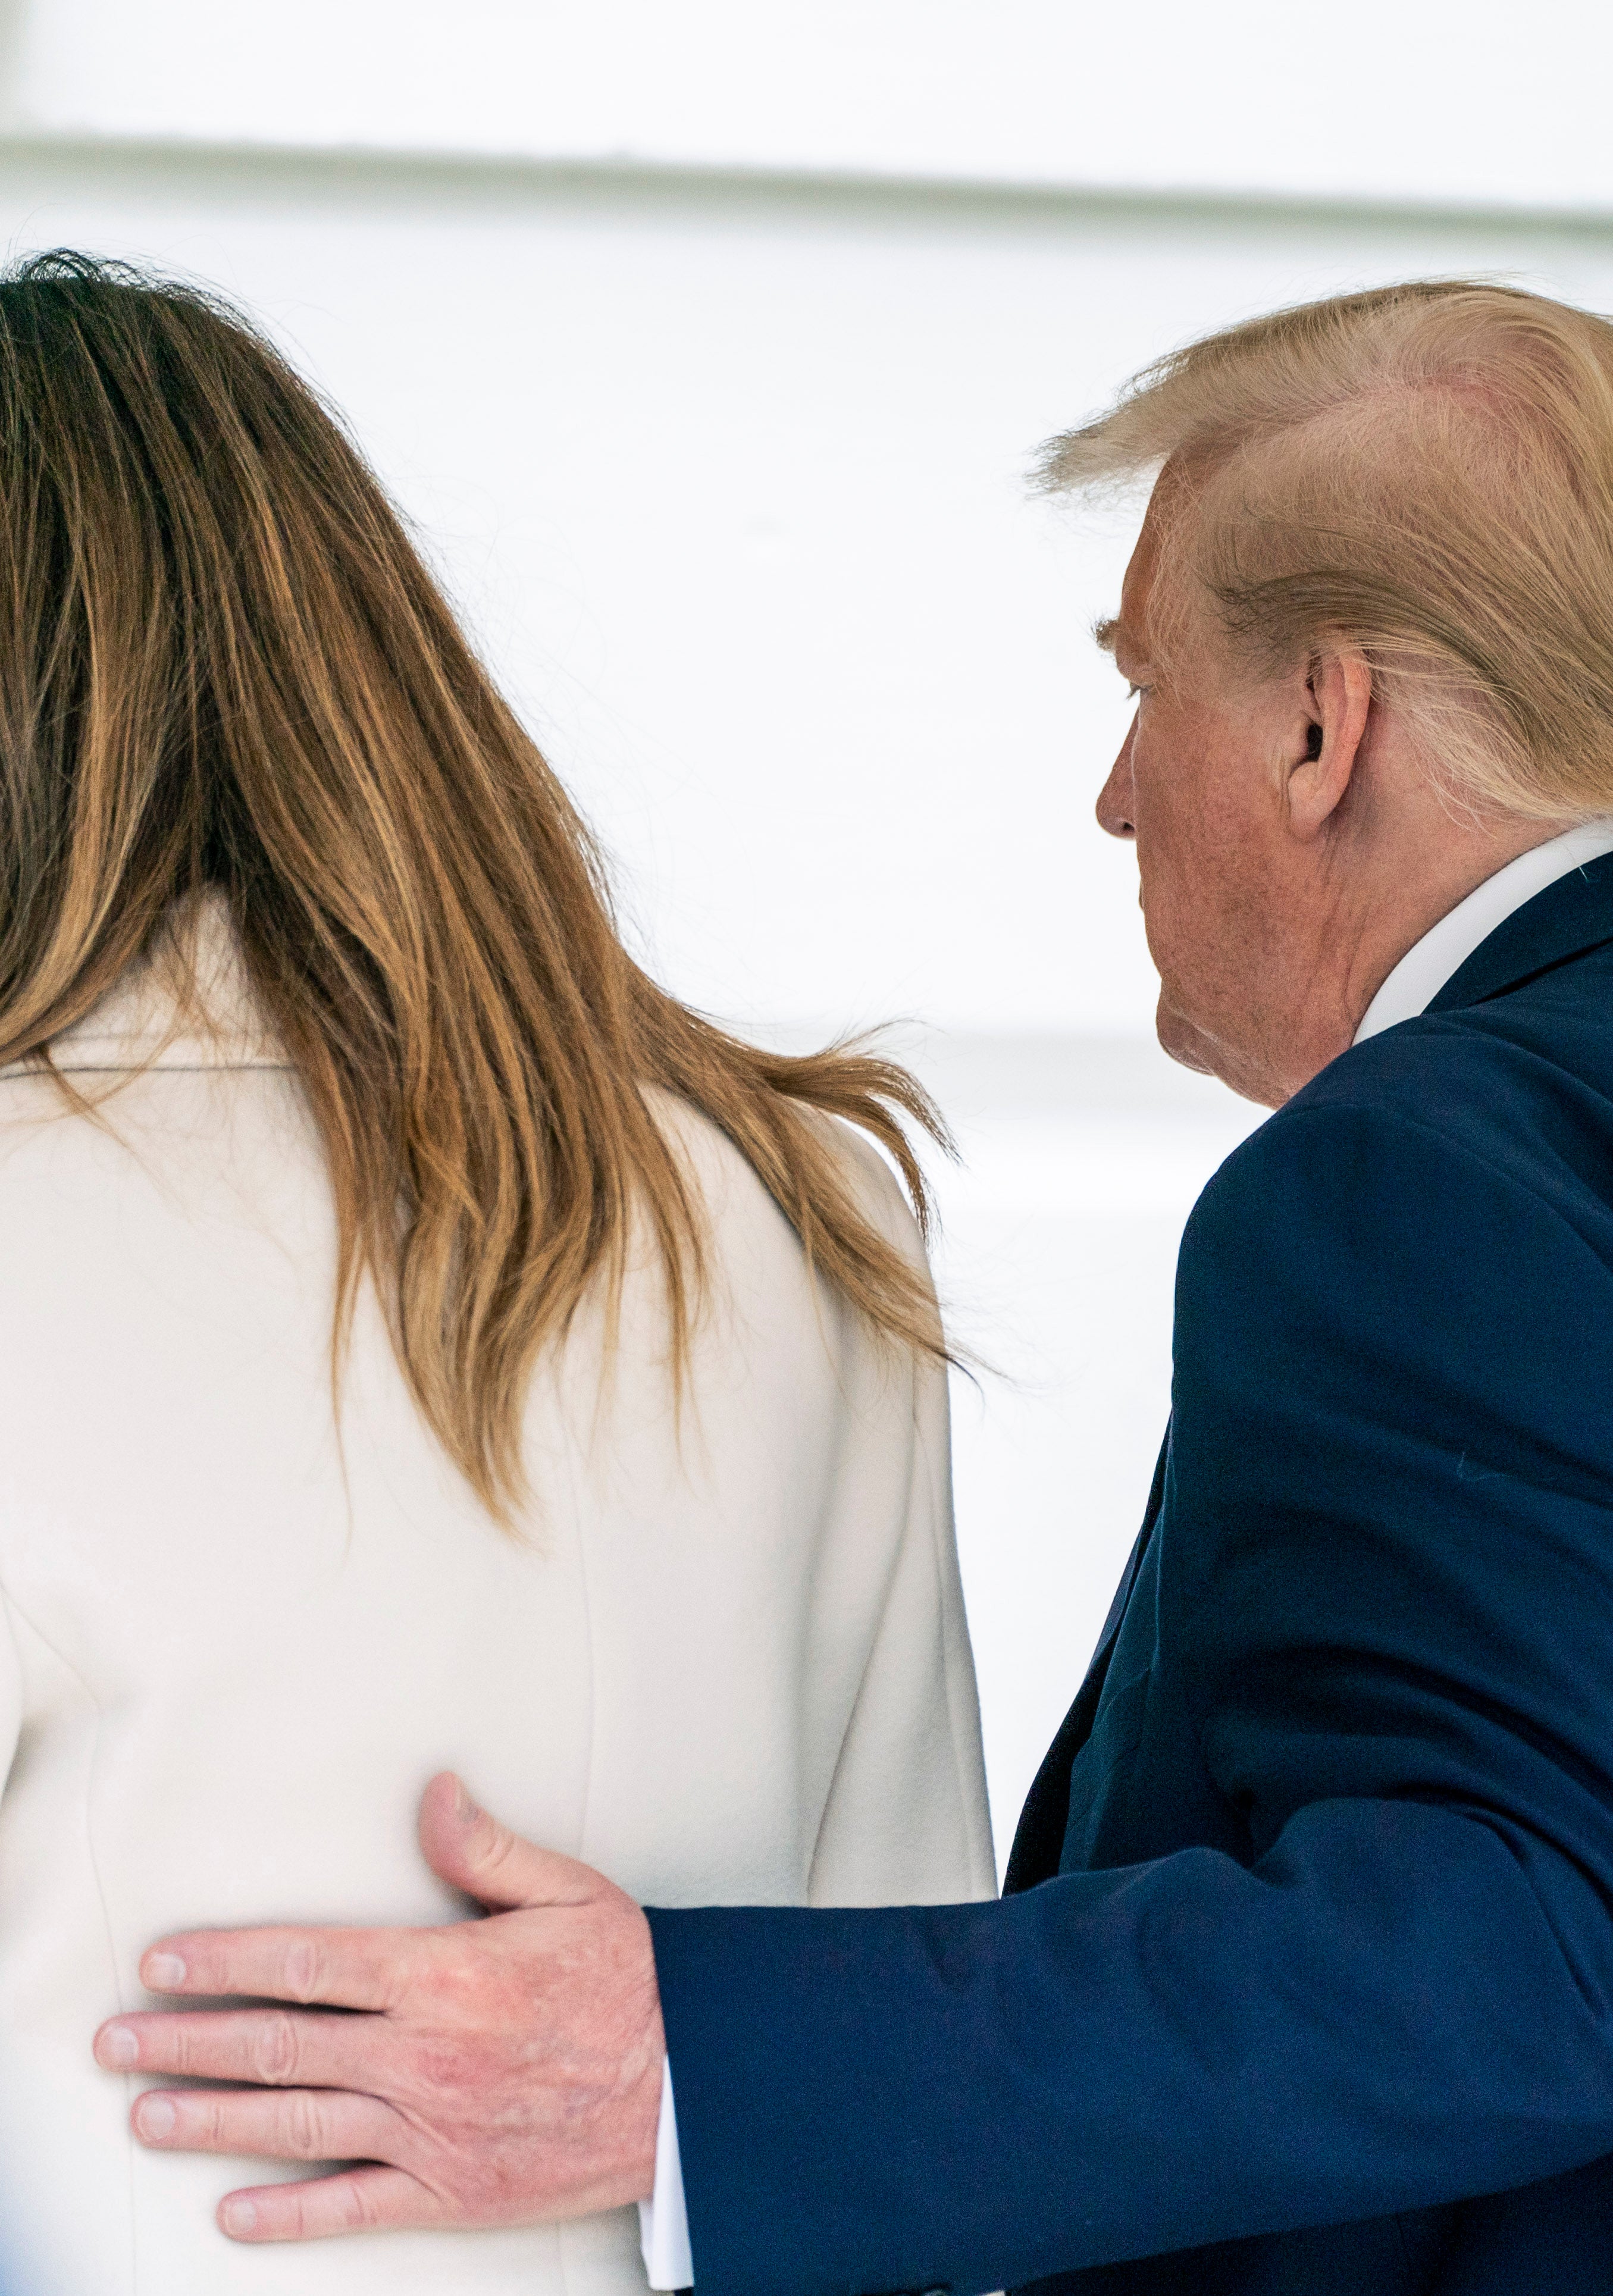 Then-US president Donald Trump and first lady Melania Trump arrive to the White House after a trip to Baltimore, Maryland, on 25 May 2020